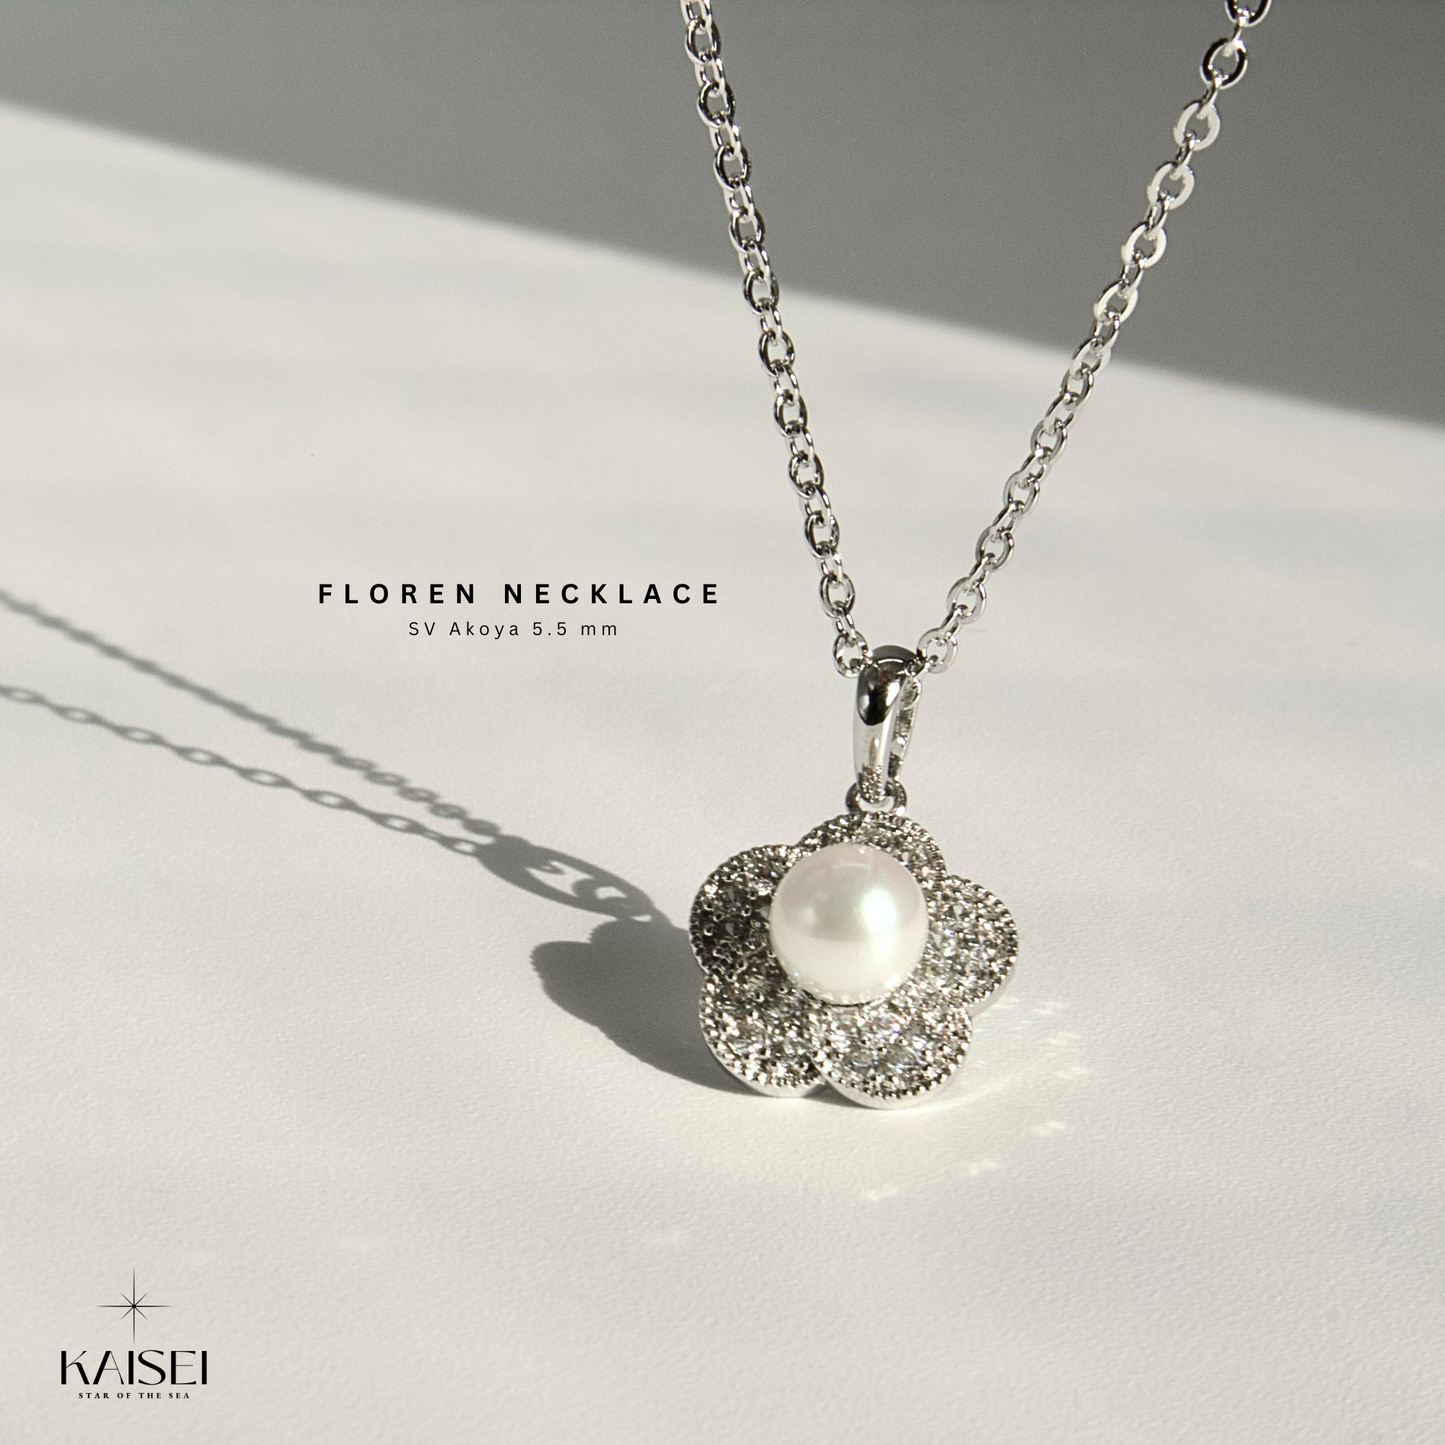 Kaisei Pearl - Floren Necklace Japanese Baby Akoya Pearl 5.5mm Finest Silver Jewelry